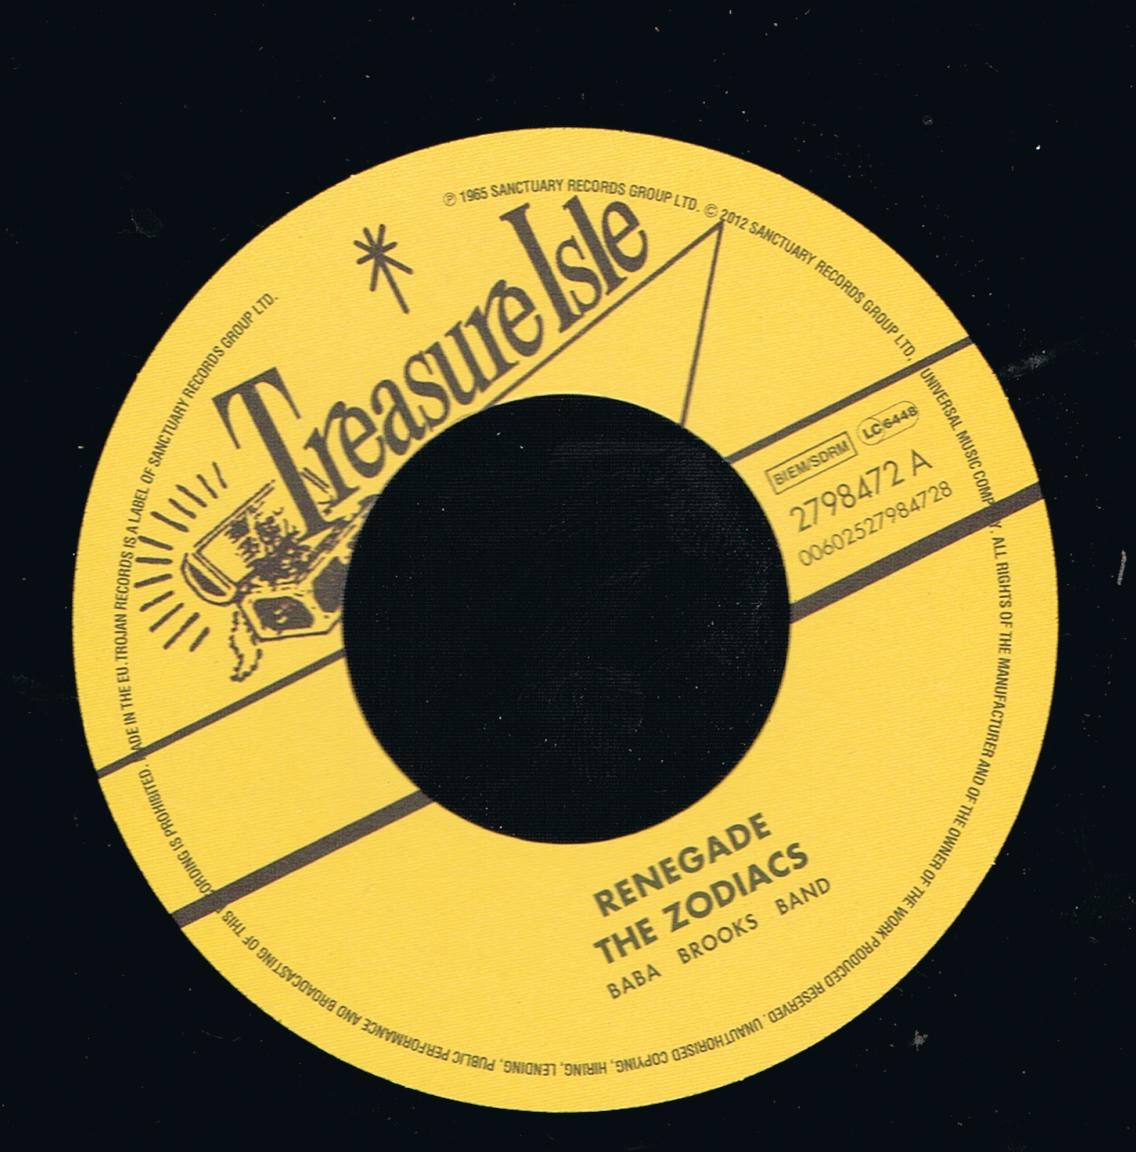 The Zodiacs - Renegade / Baba Brooks Band - Duck Soup (7")